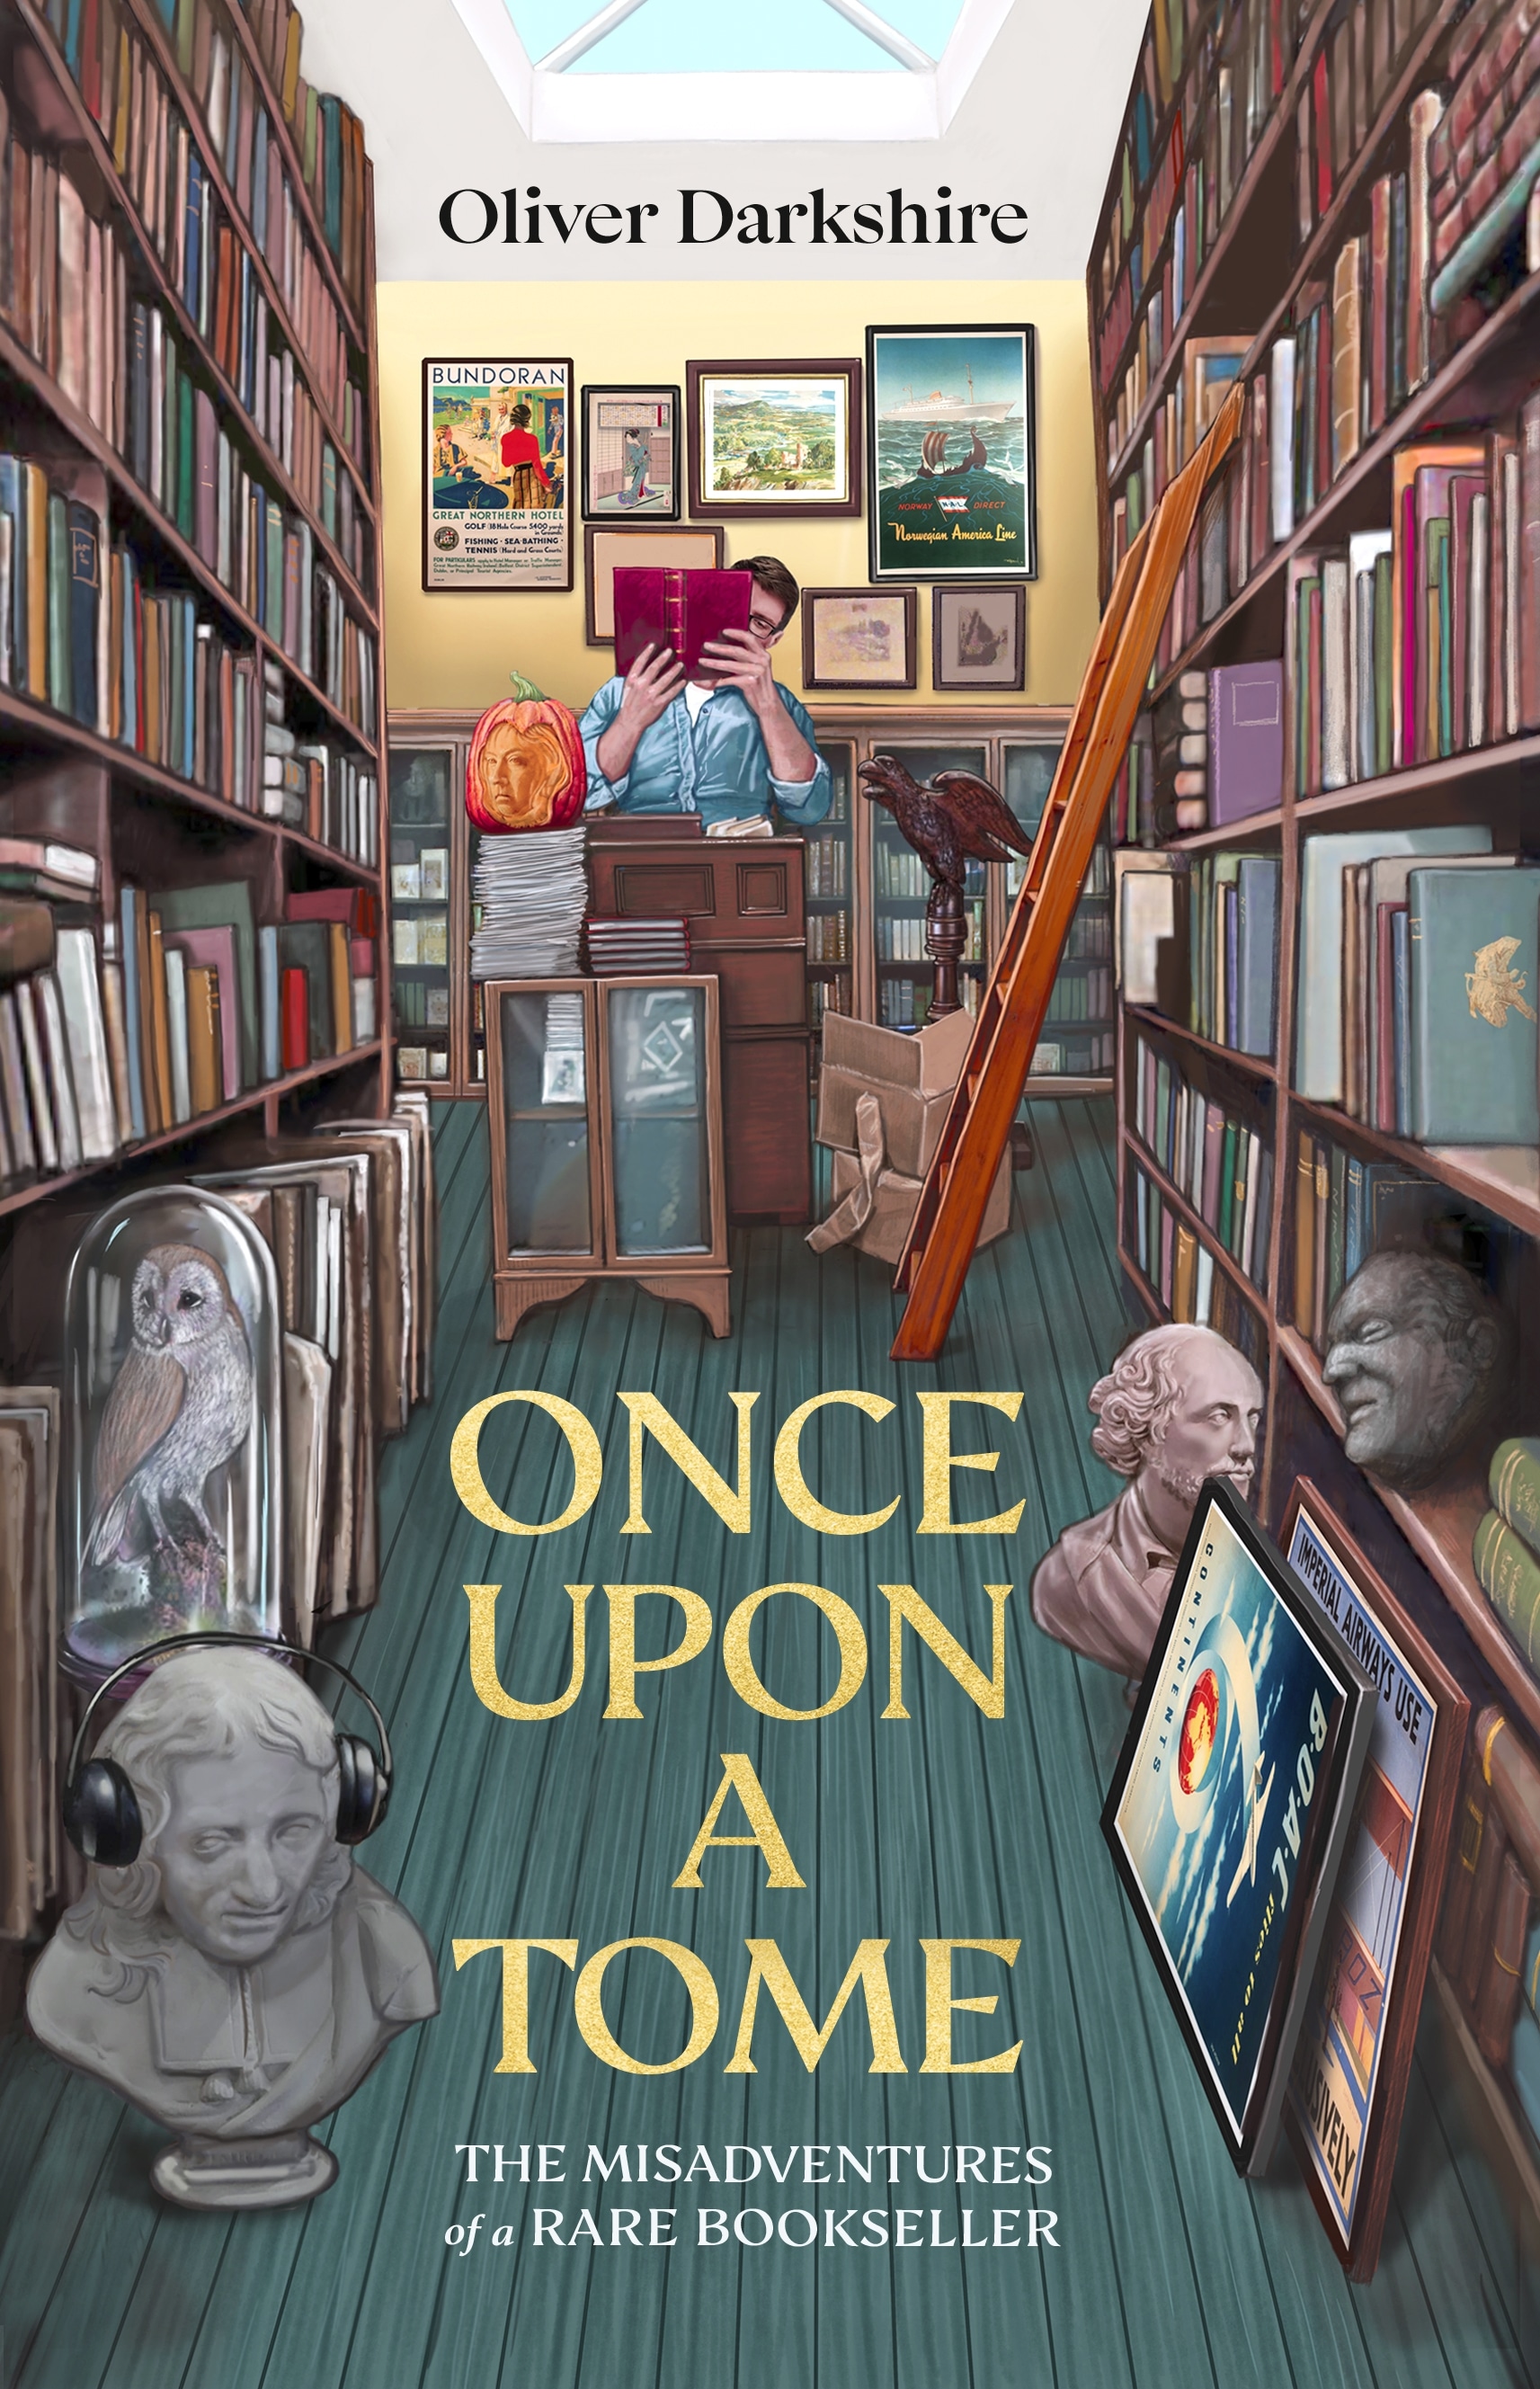 Book “Once Upon a Tome” by Oliver Darkshire — October 6, 2022